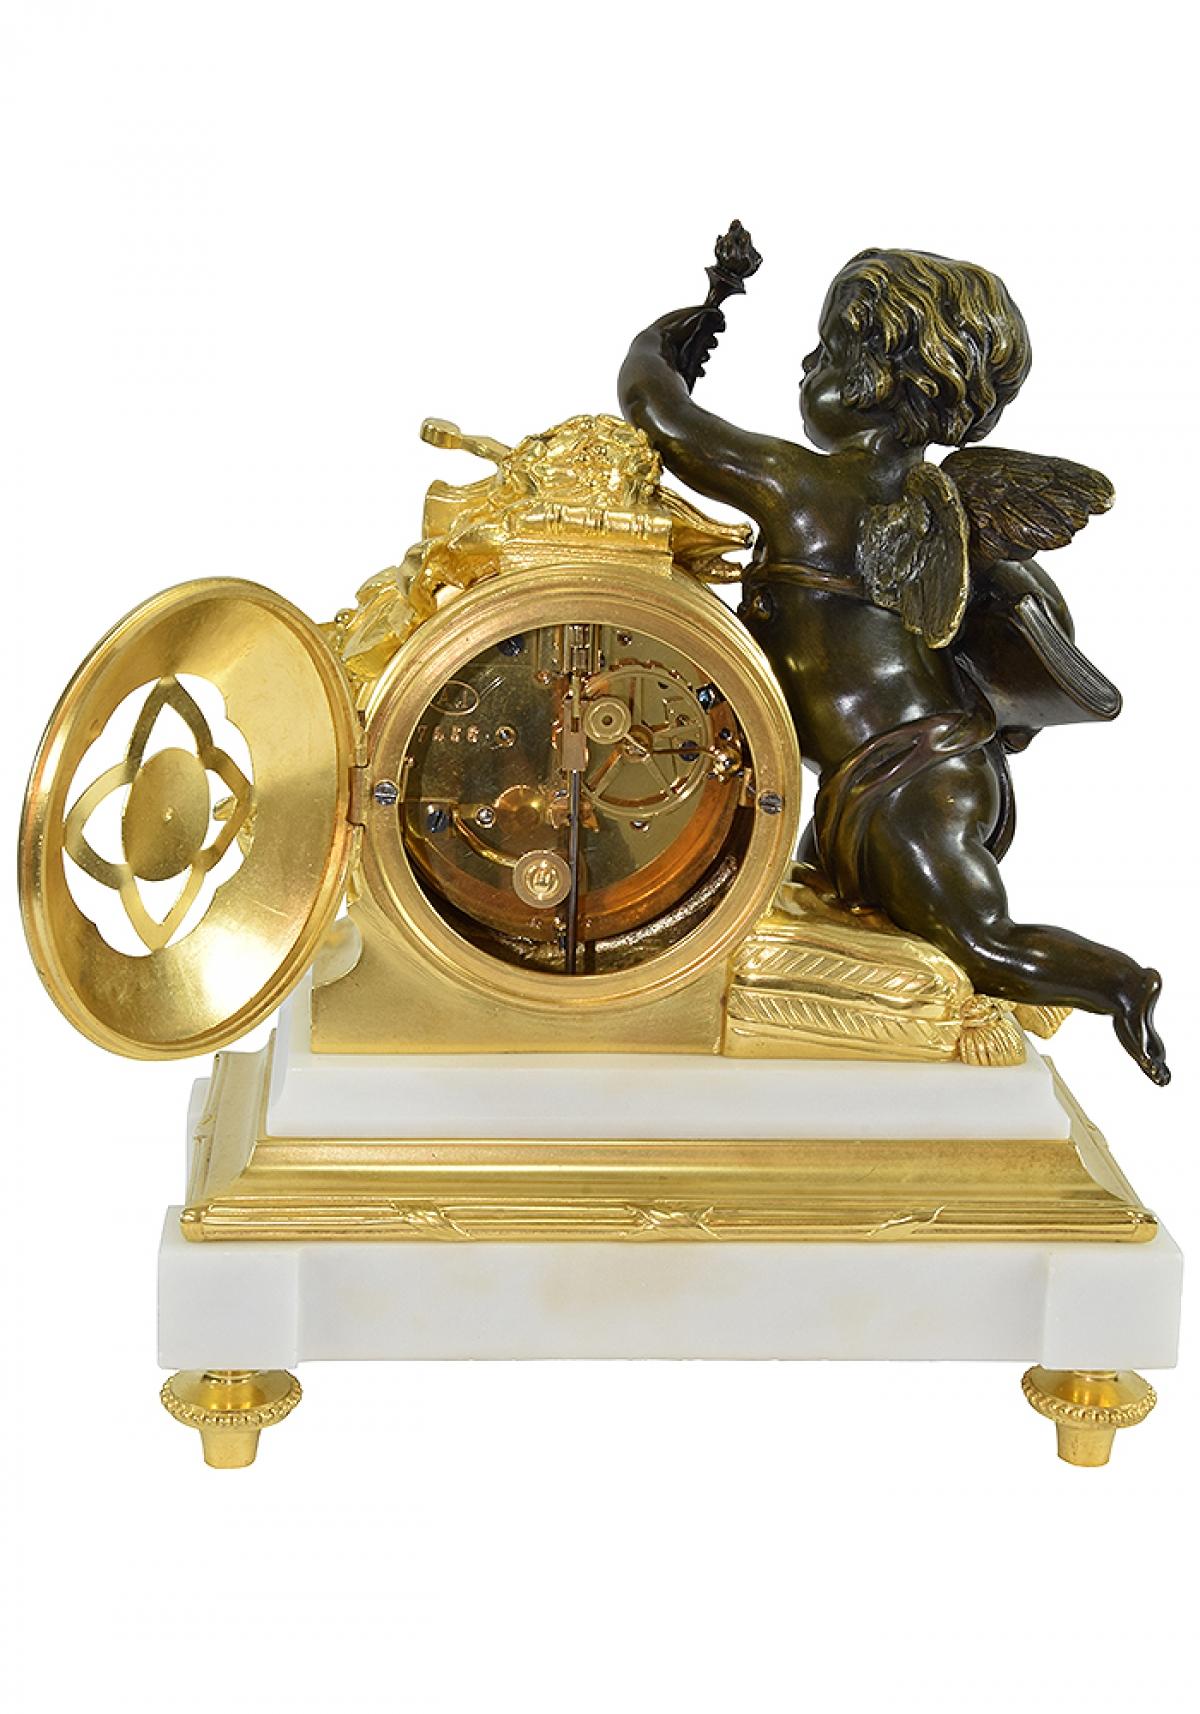 European Magnificent Small Clock in the Louis XVI Style